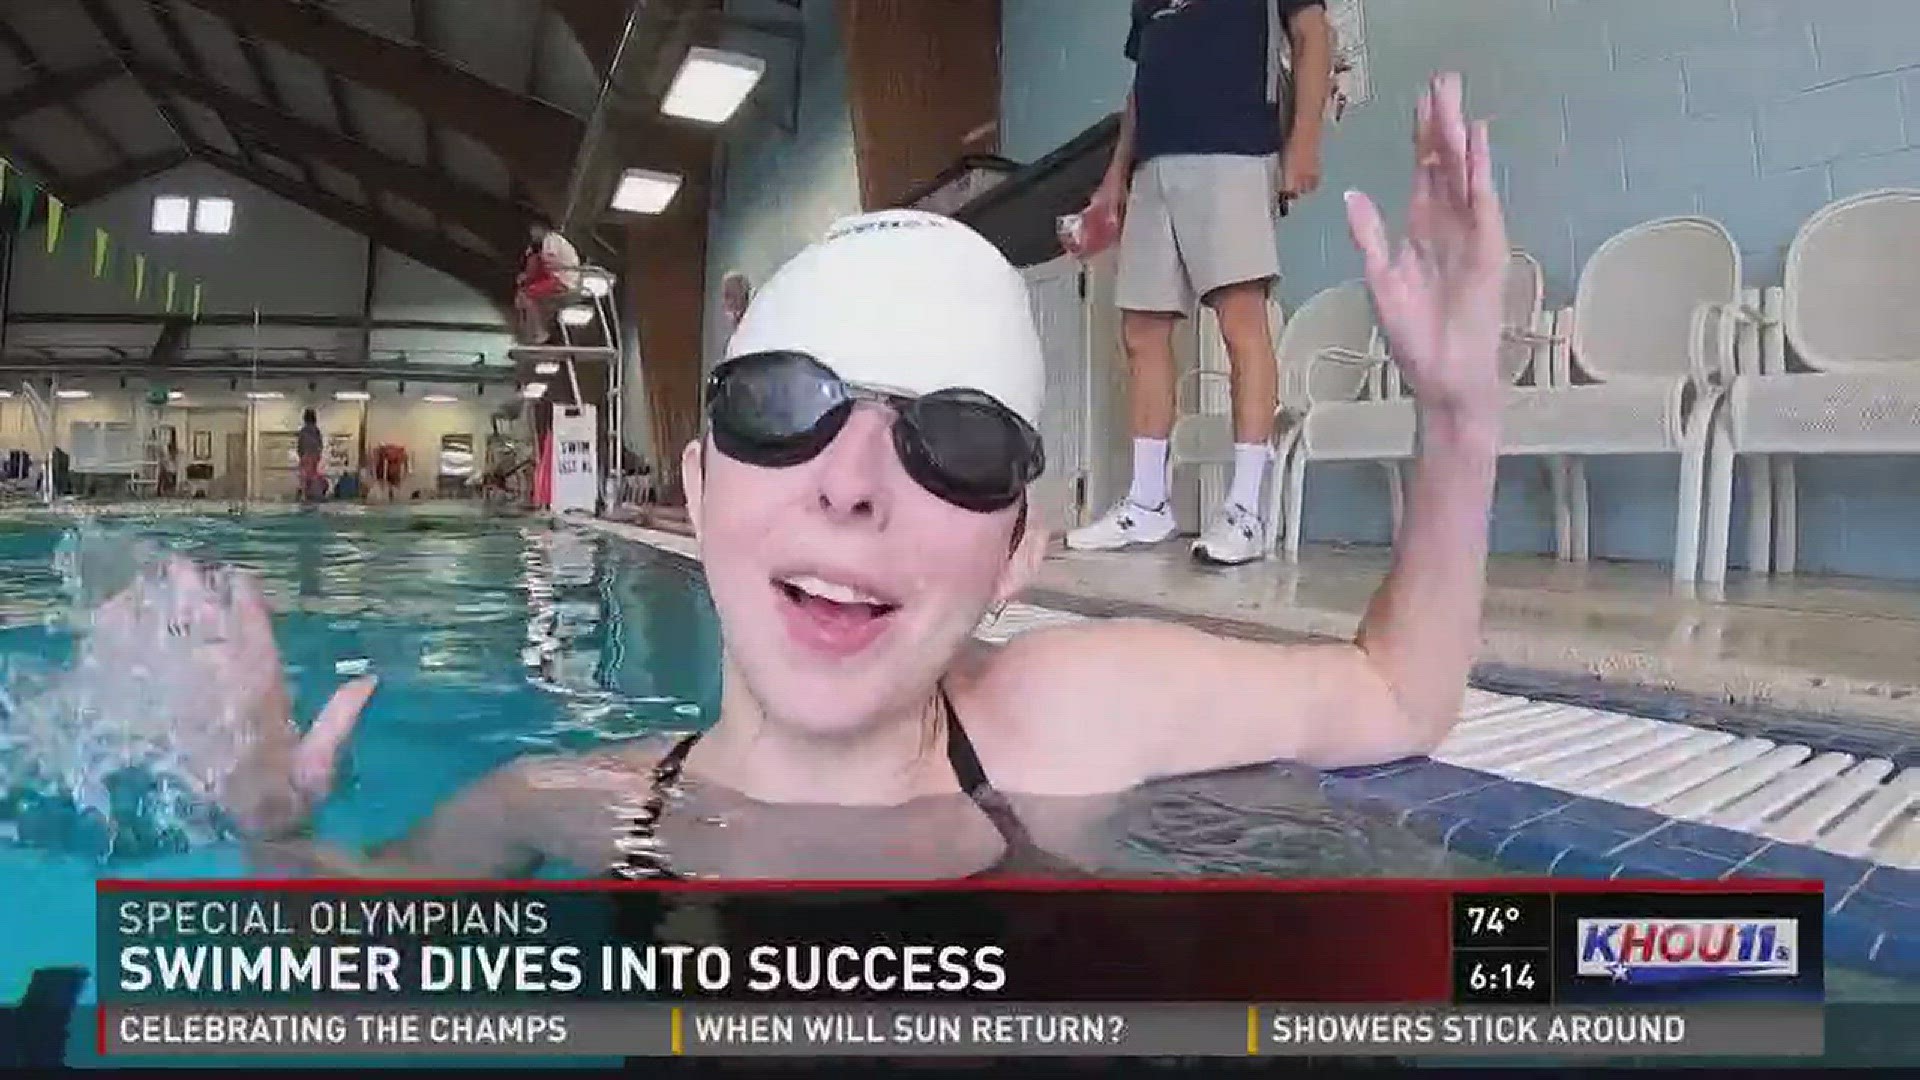 A young Special Olympian is overcoming obstacles and making waves in the pool.